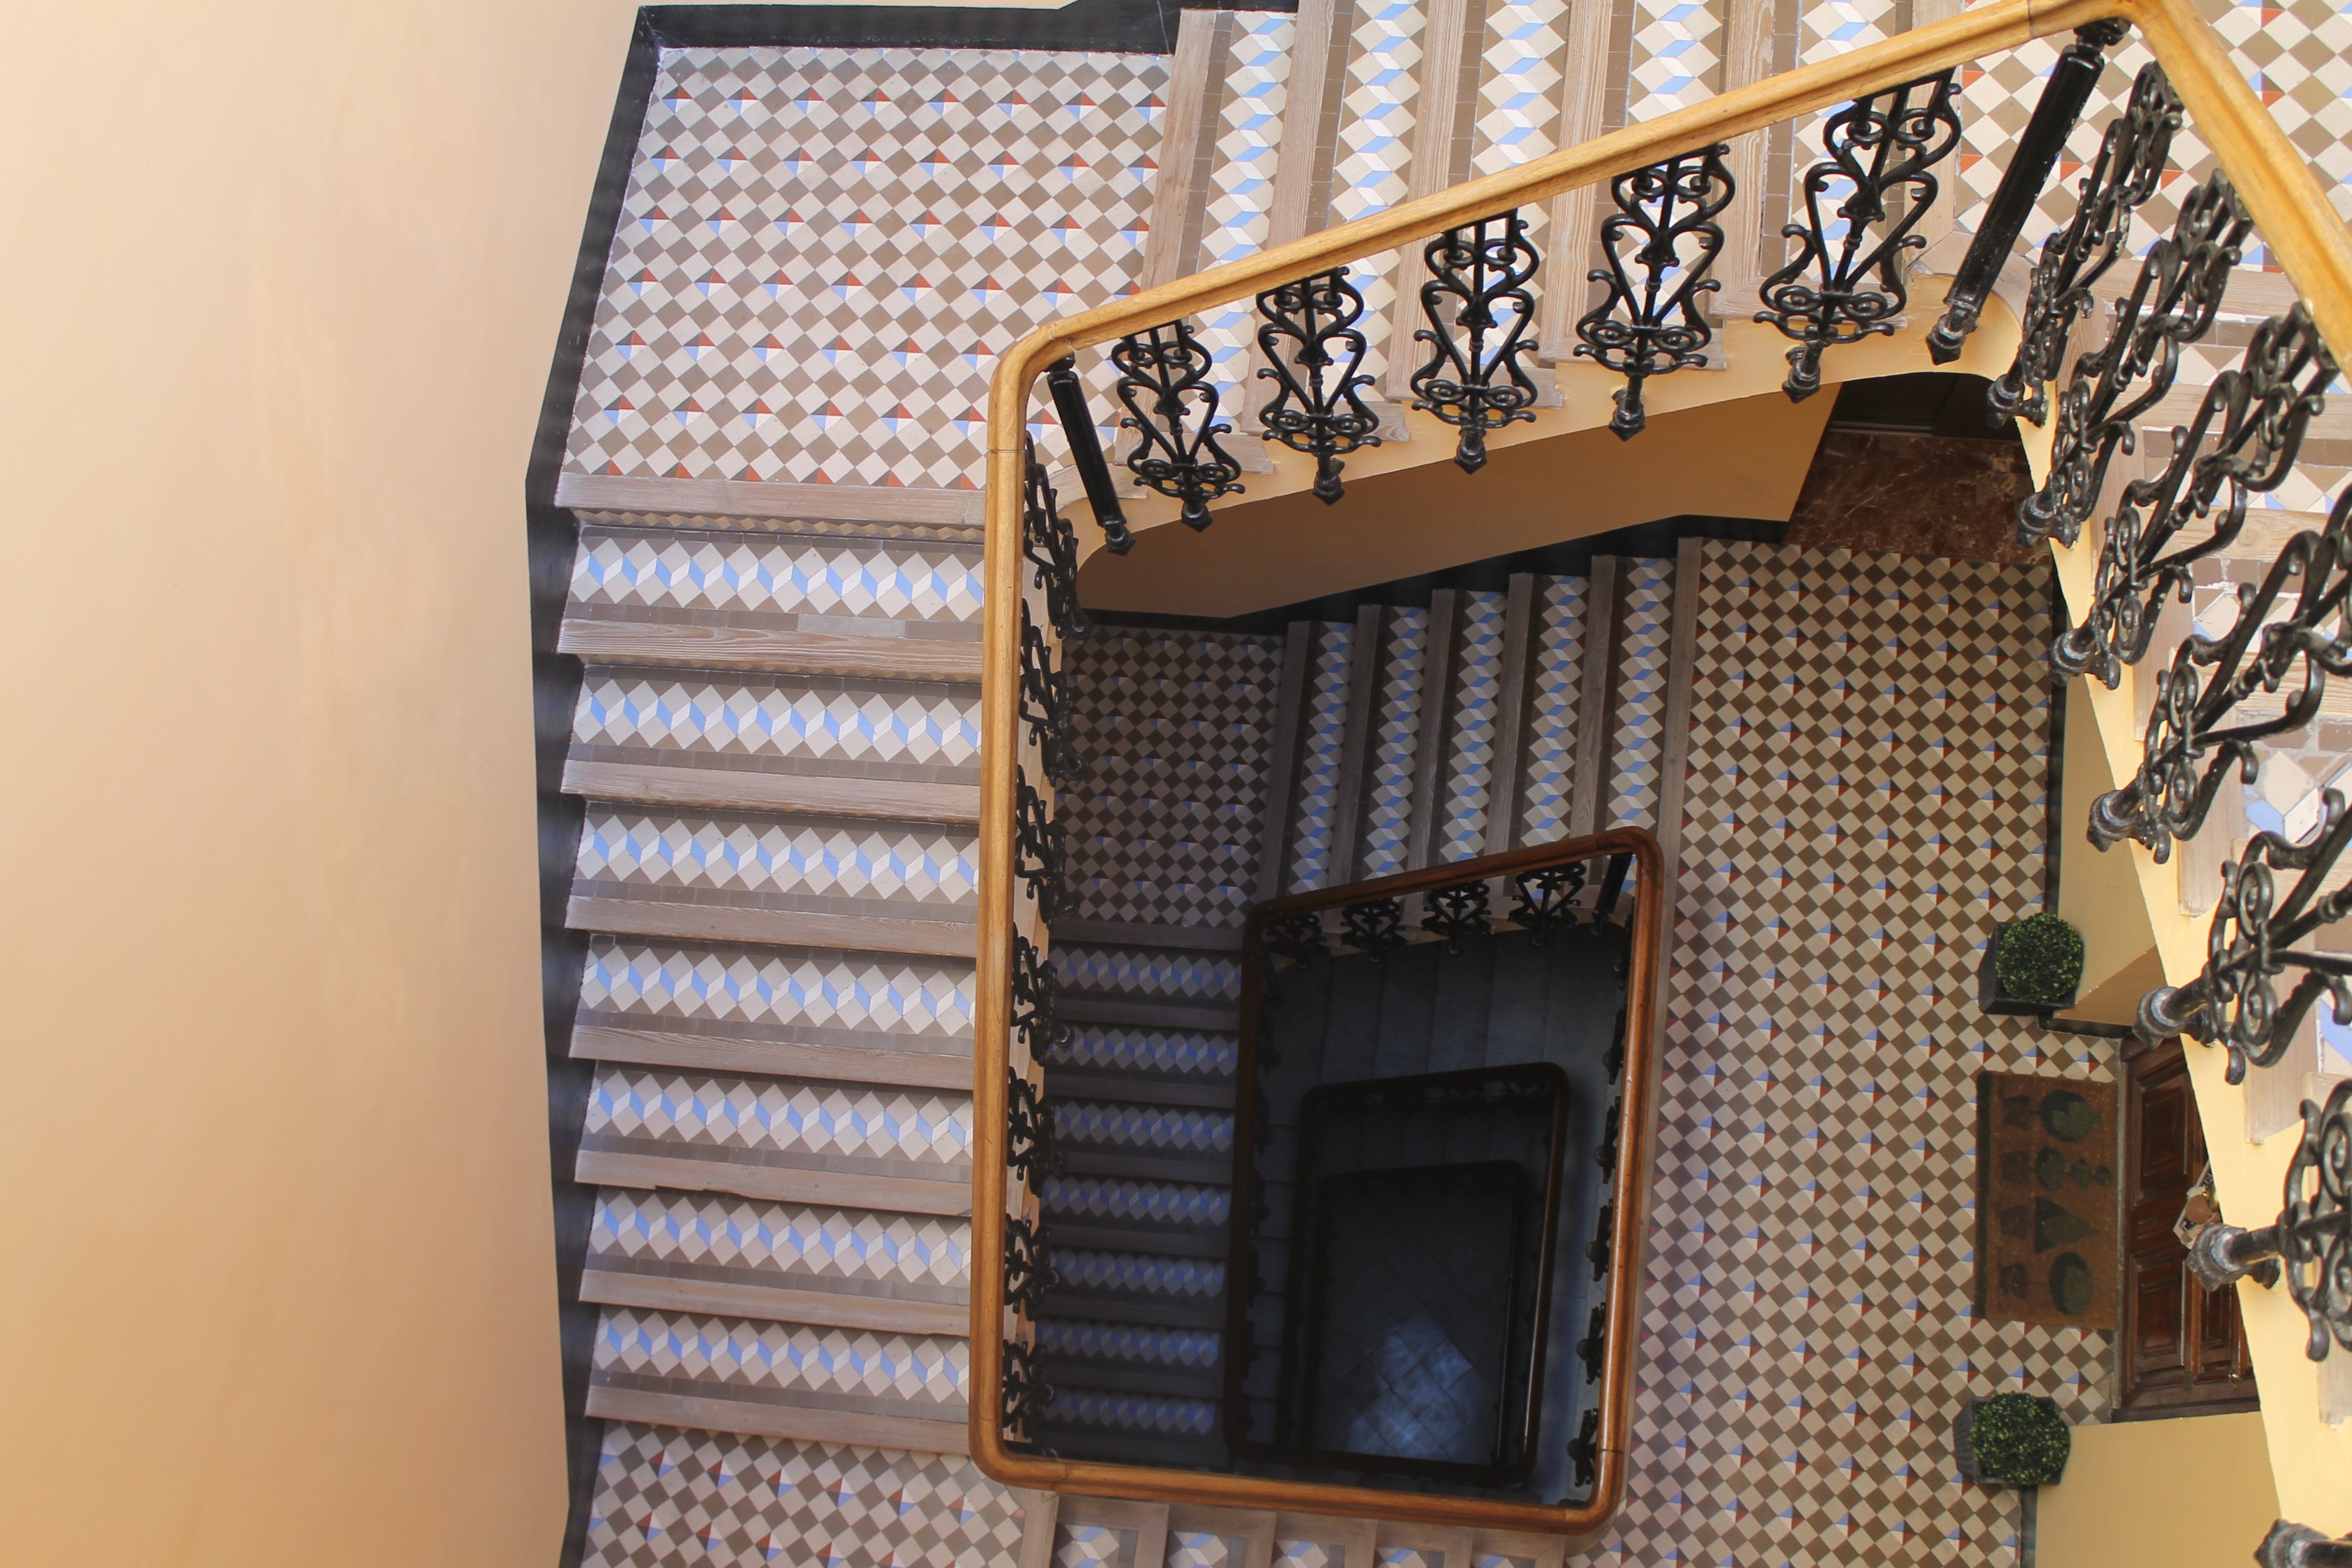 Mosaics, Stairs, Architecture, Handrail, staircase, steps and staircases